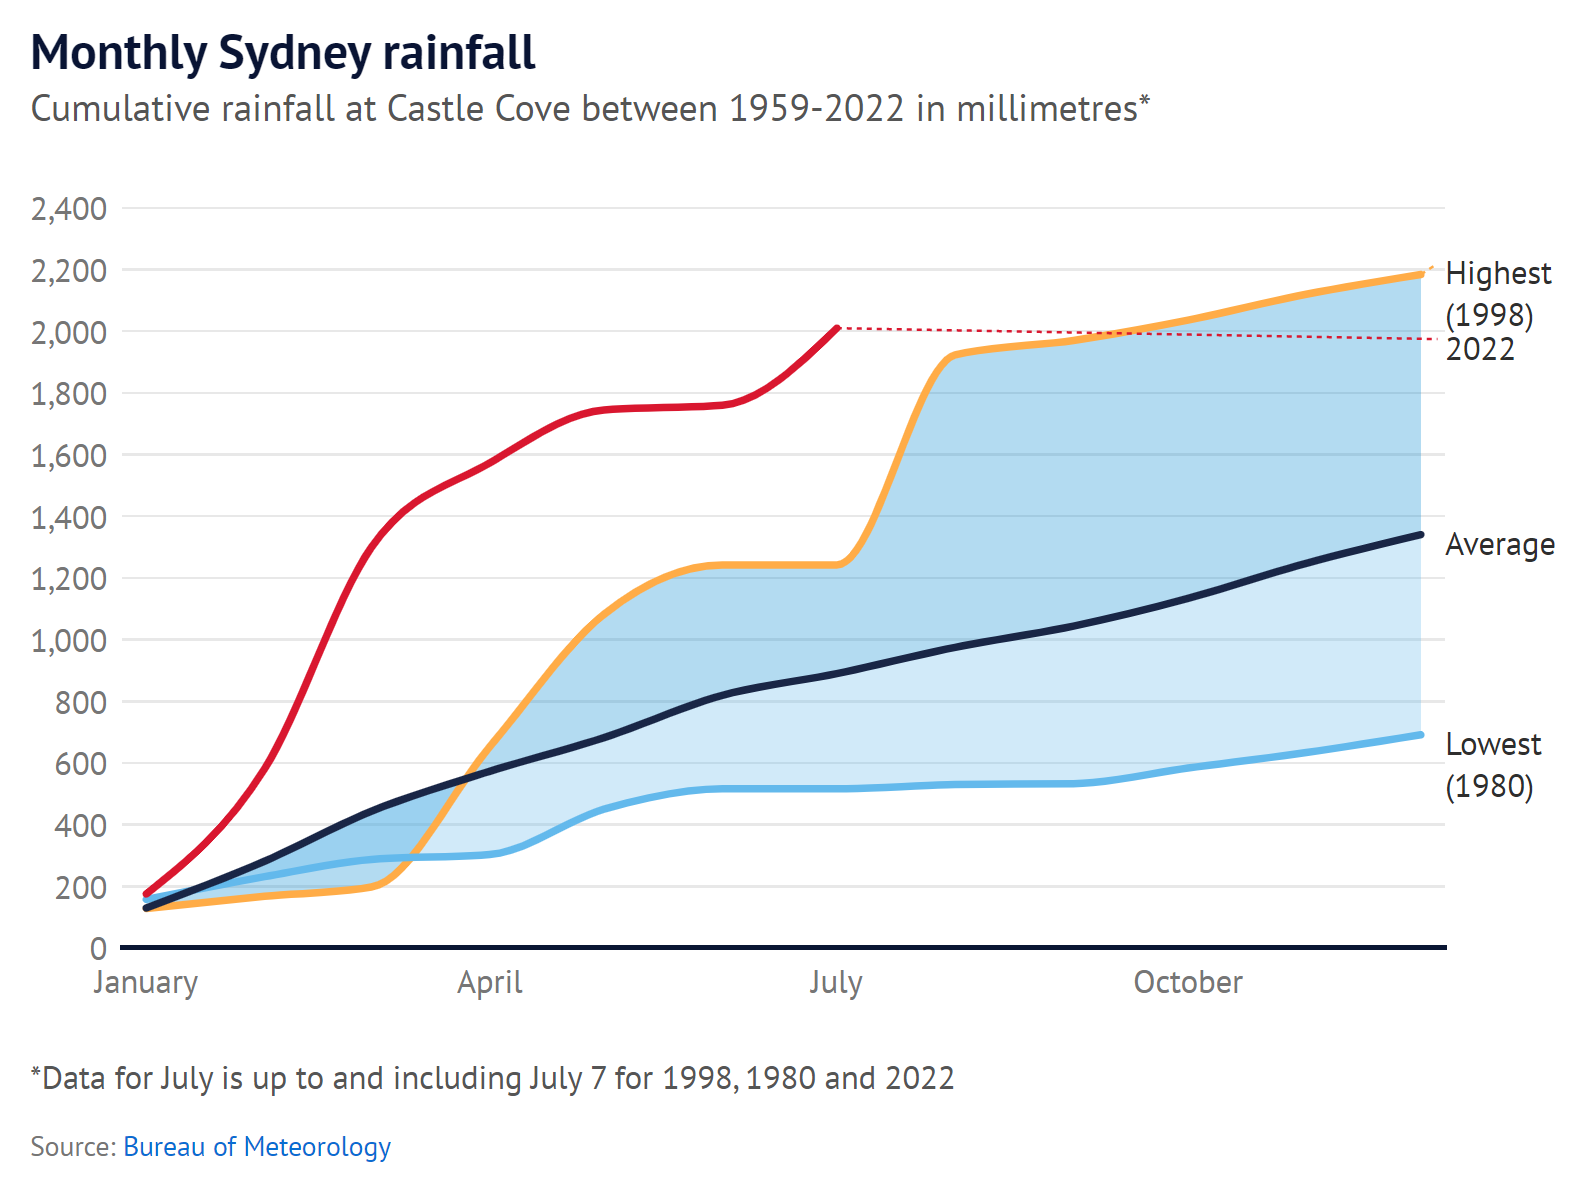 Monthly cumulative rainfall at Castle Cove, Sydney, Australia, 1959-2022 in millimeters. In June and July 2022, Camden in Sydney’s south-west had over 15 centimetres of rain in one day. Parts of the Illawarra had an astonishing 35 centimetres. Dozens of local rainfall records were smashed. In the first week of July, it was already Sydney’s eighth-wettest July in over a century of records. Graphic: The Sydney Morning Herald